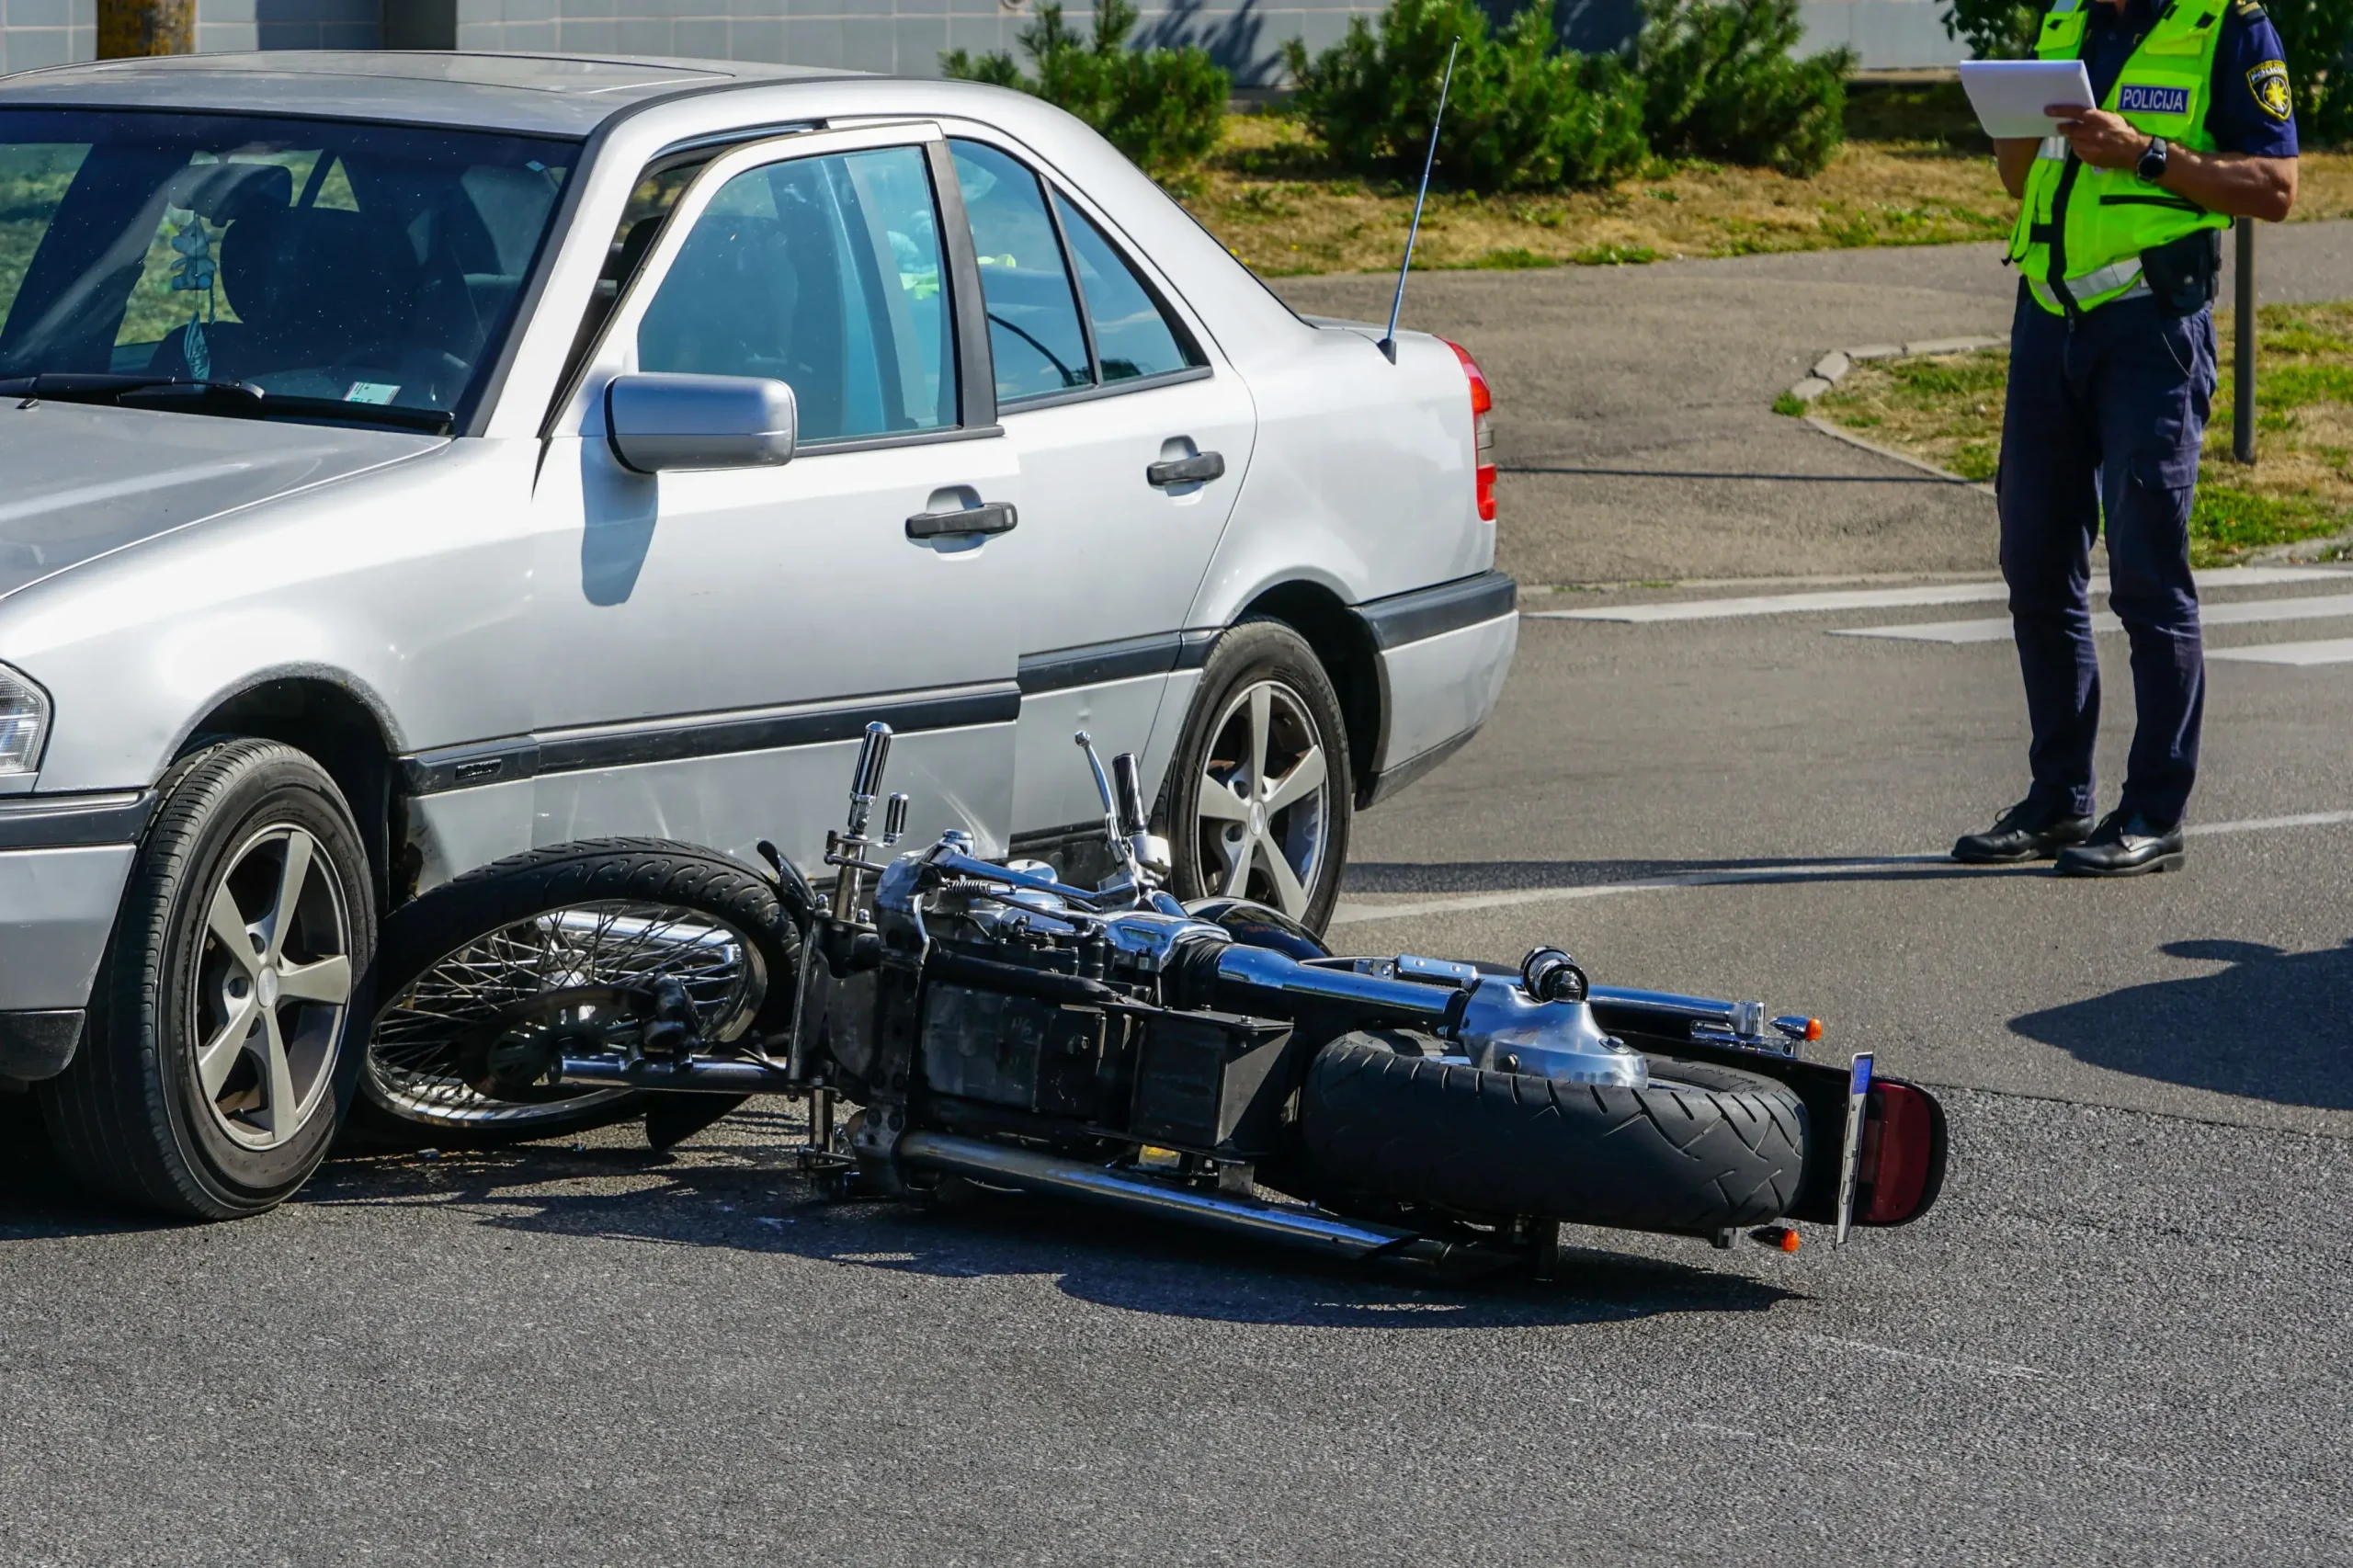 A bike lying next to a car that it crashed into.